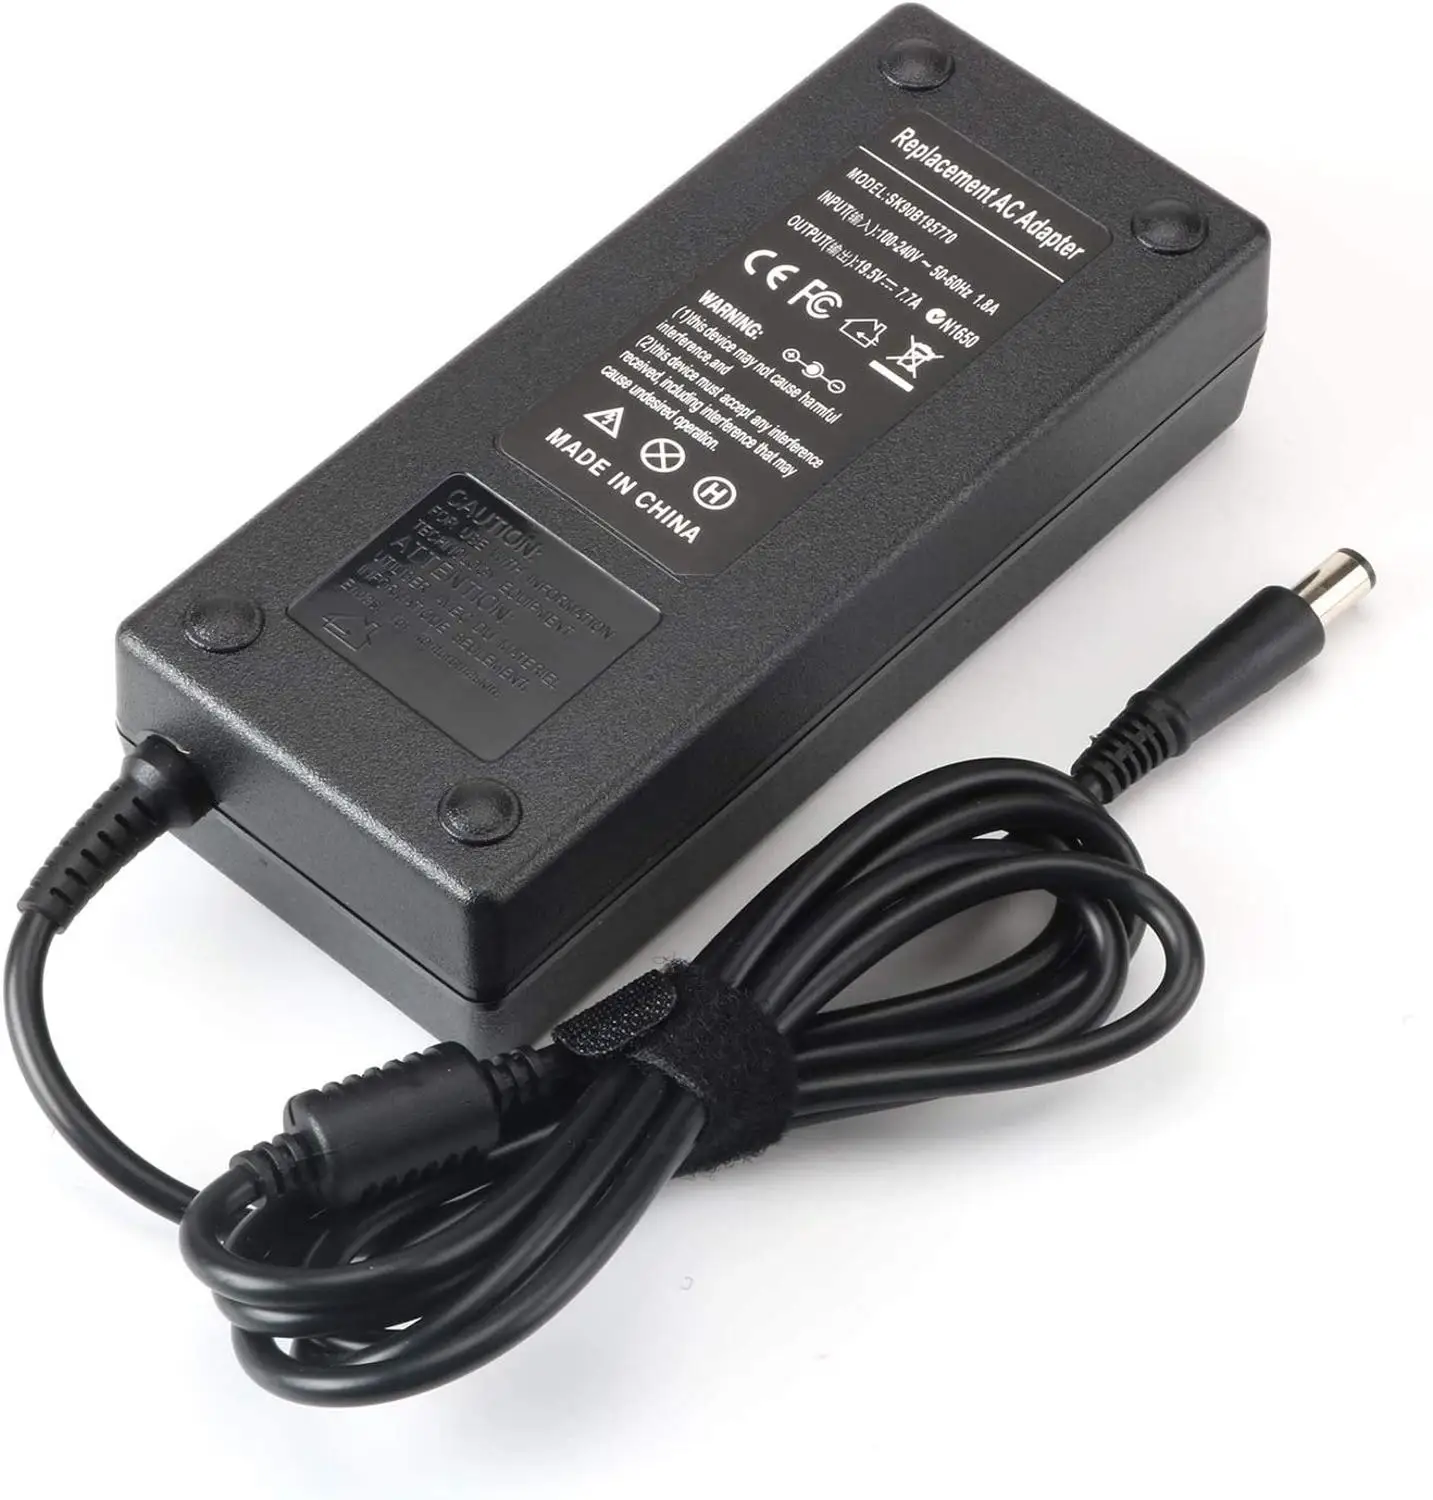 150W 19.5V 7.7A AC Power Adapter Charger Replacement for Alienware M14x M15X  For Dell Inspiron 5150, 5160, 9100, 9200